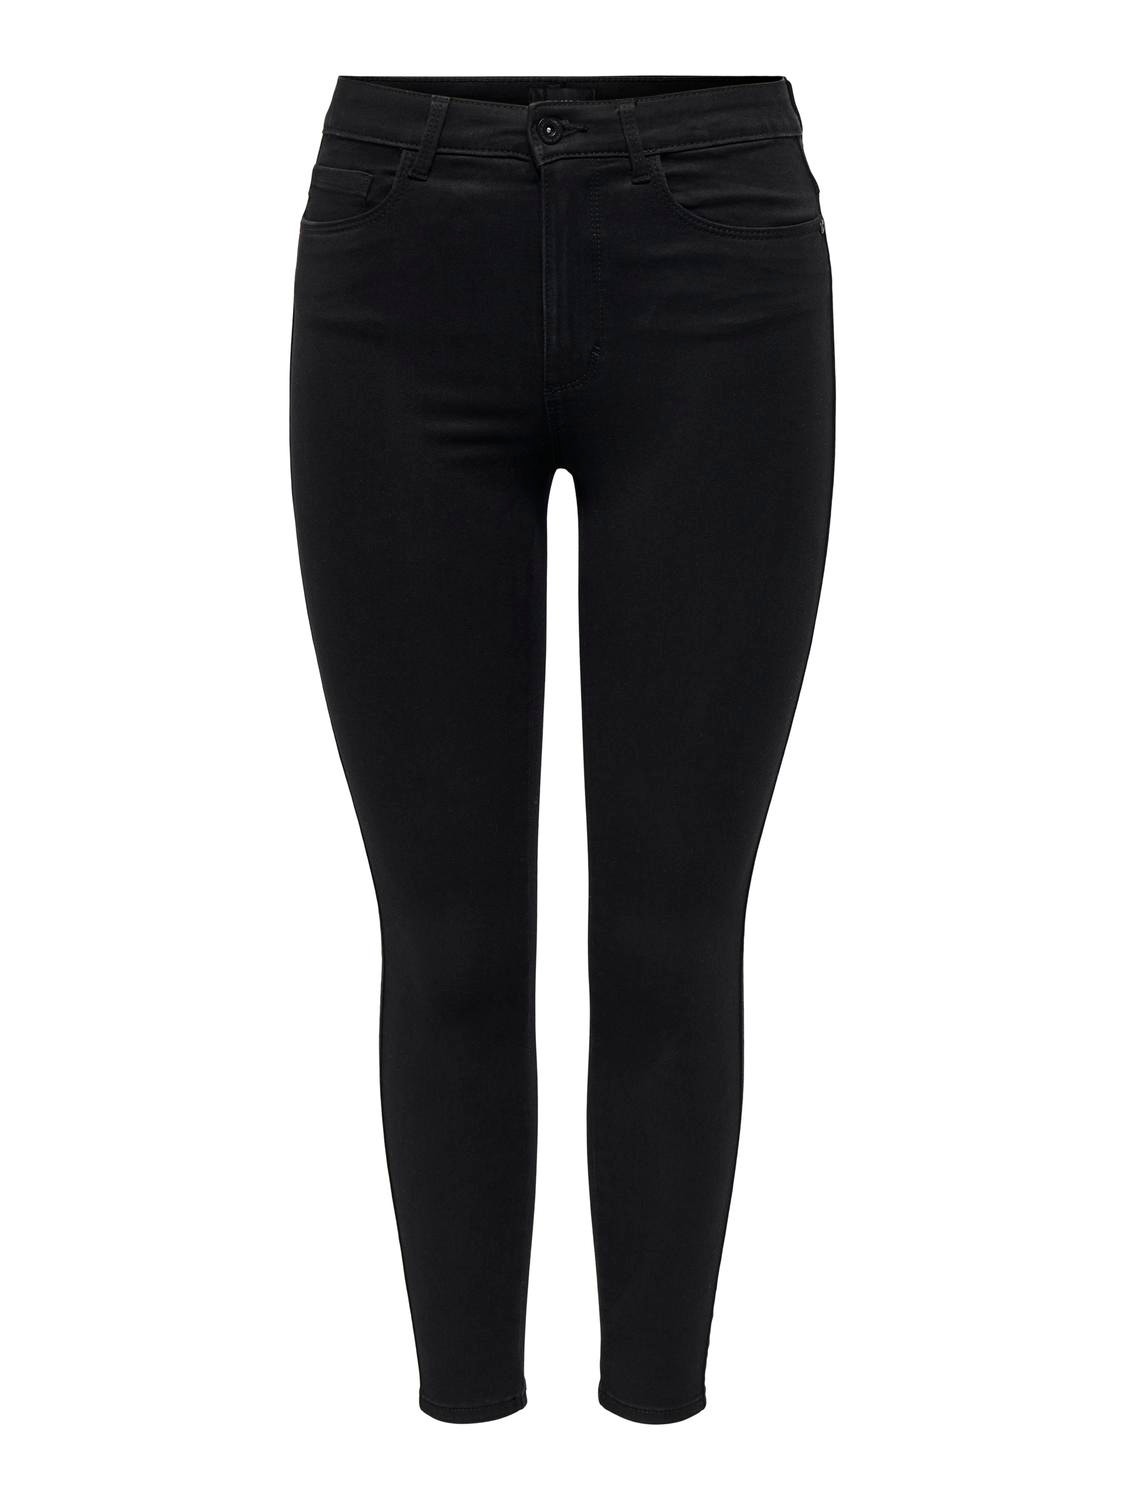 ONLY ONLROYAL HIGH SK JEANS 600 PETIT NOOS -Black - 15178993